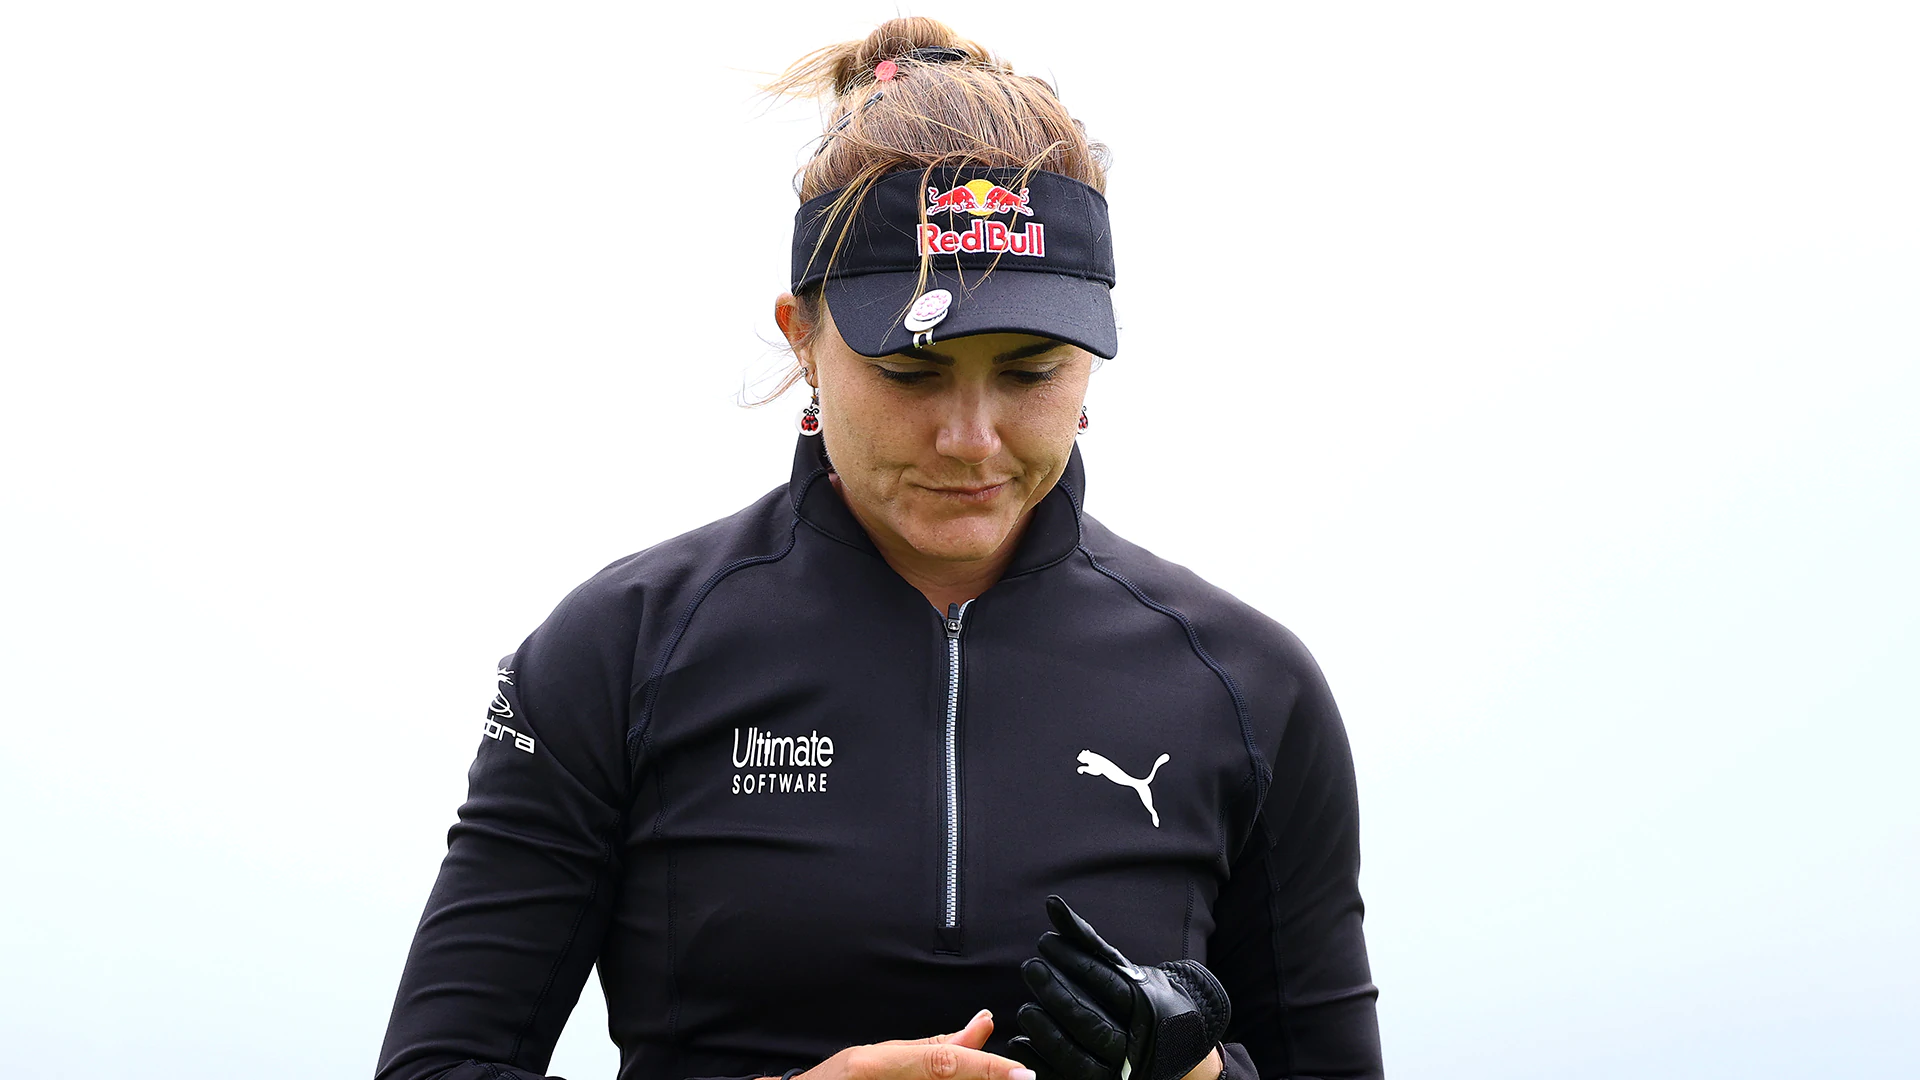 R&A says Lexi Thompson did not improve her lie Thursday at Women’s Open